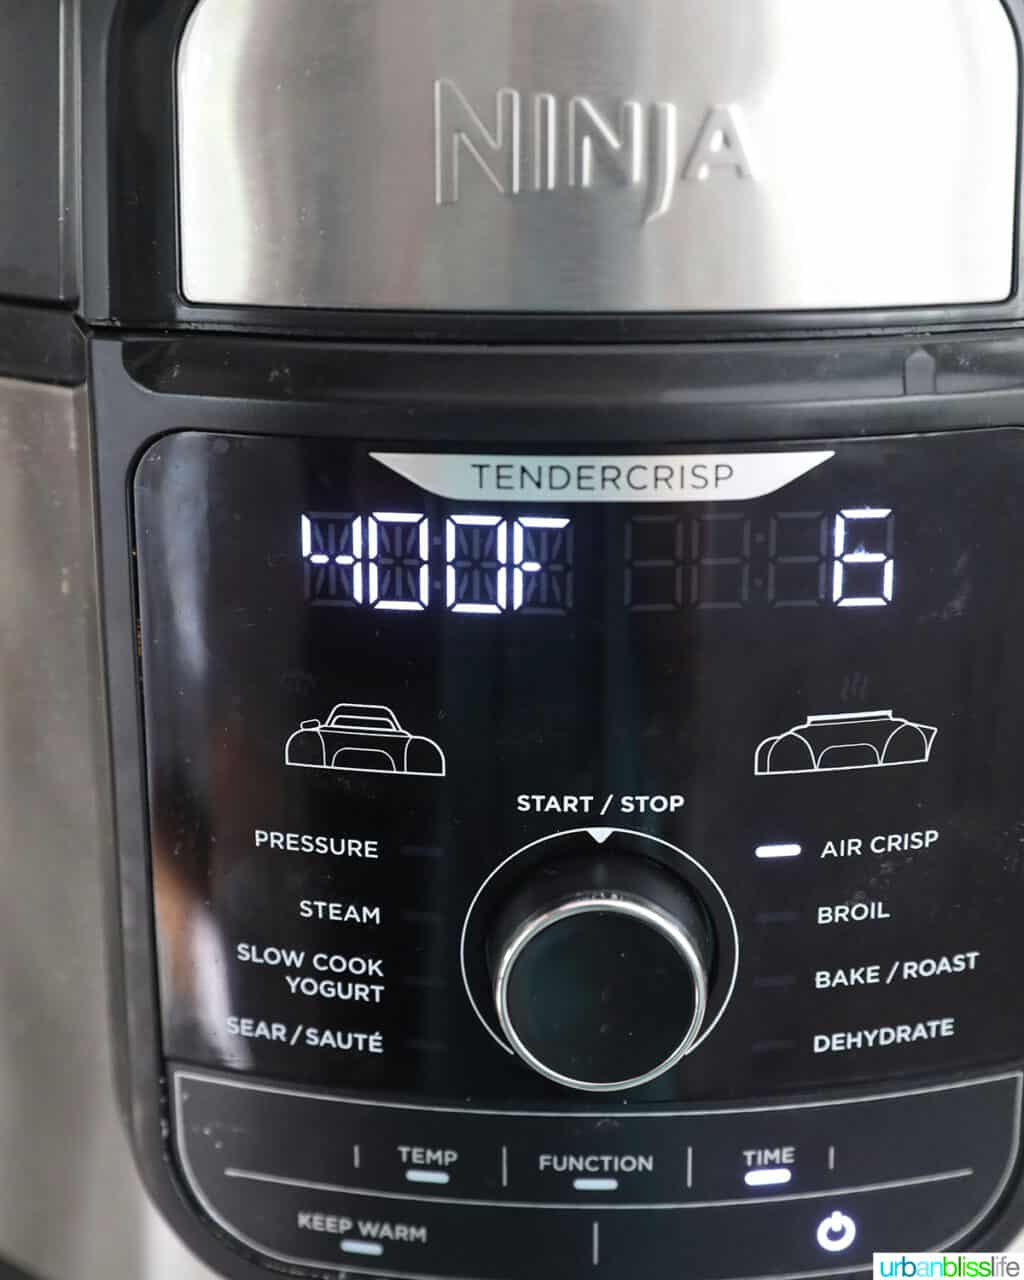 air fryer set to 400 degrees and 6 minutes